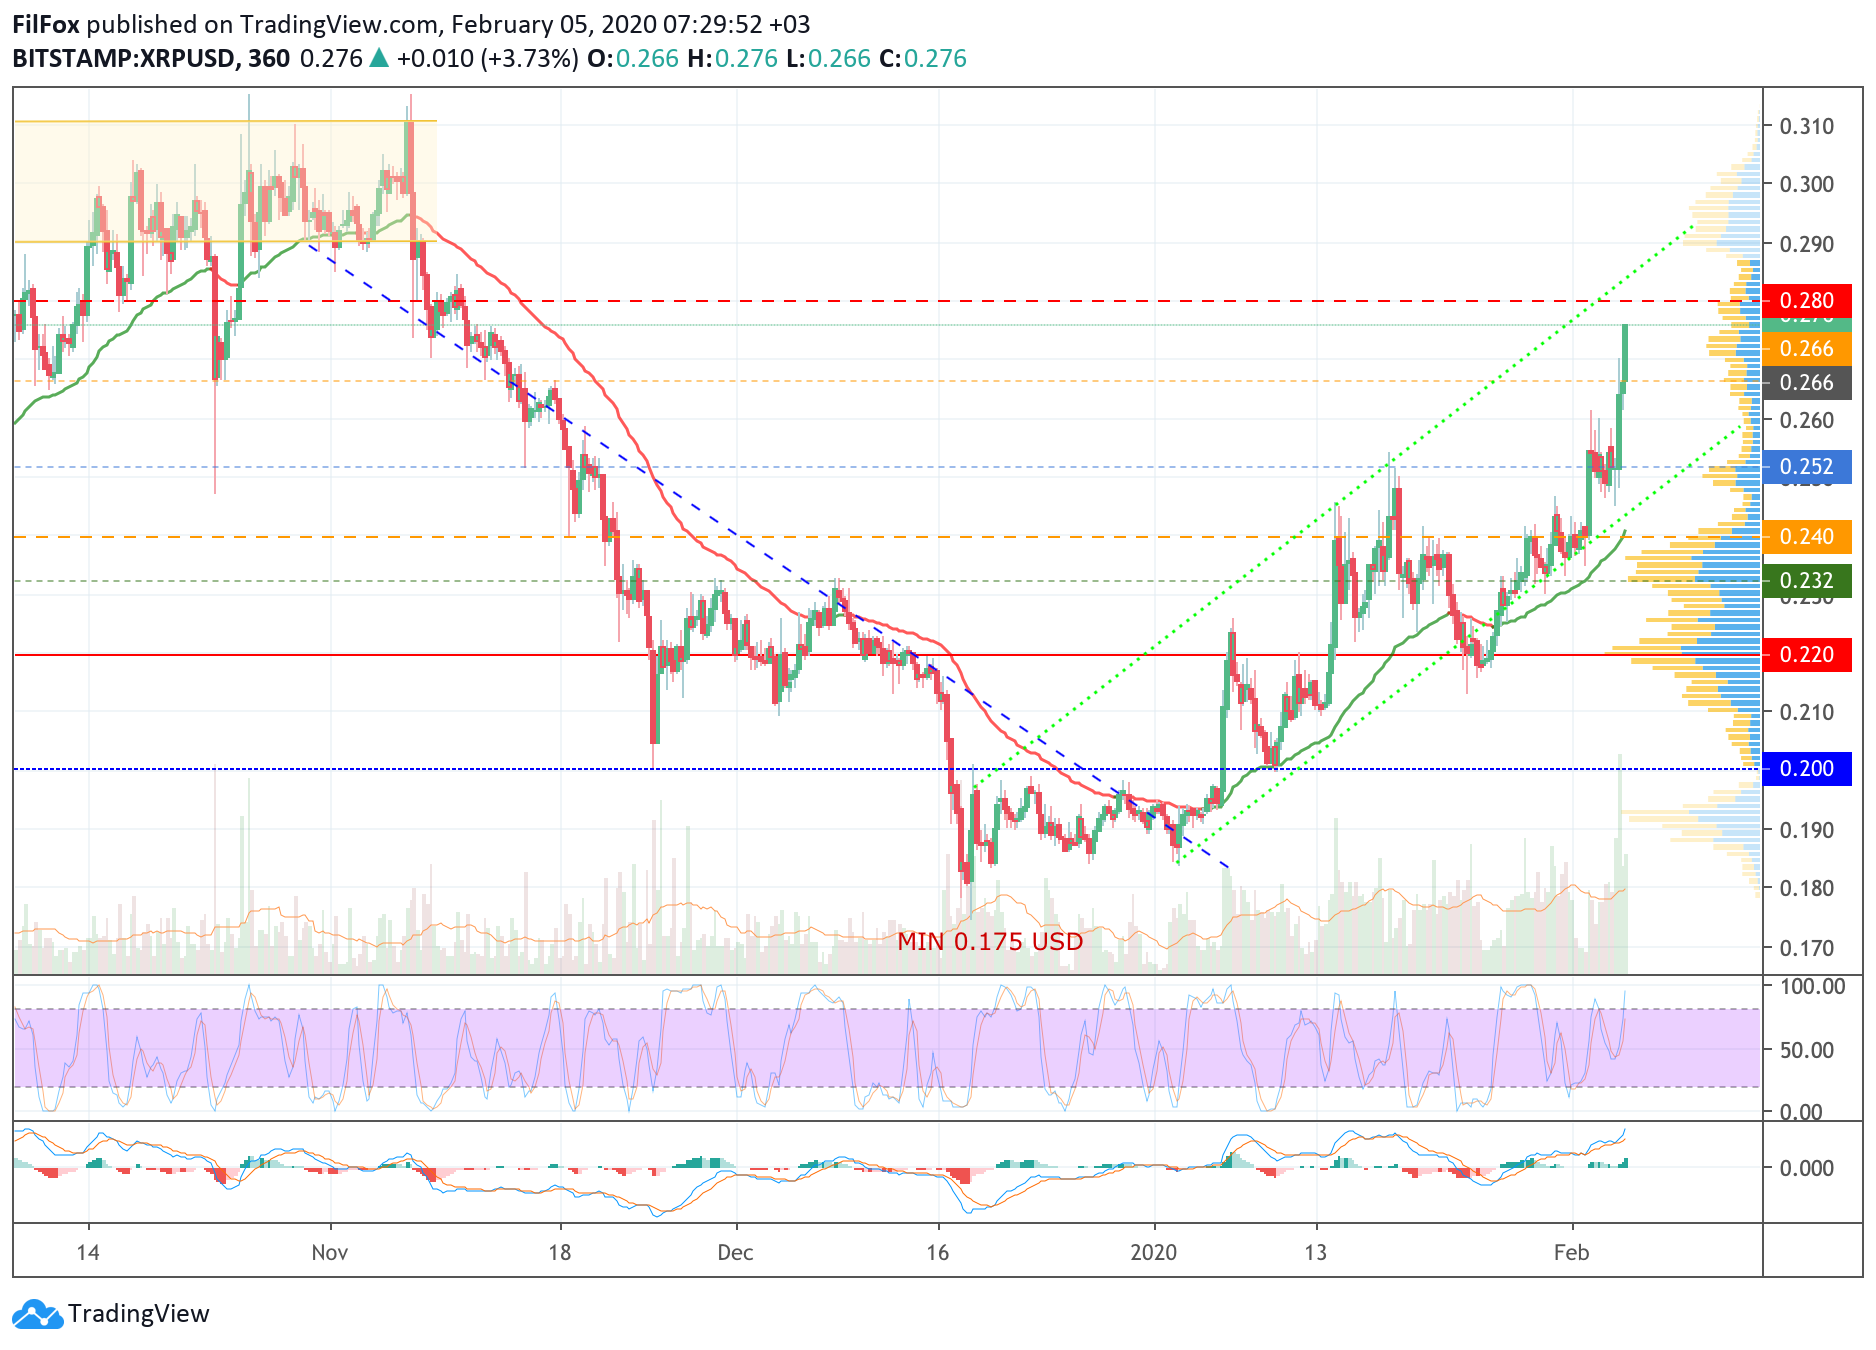 Analysis of cryptocurrency pairs BTC / USD, ETH / USD and XRP / USD on 02/05/2020